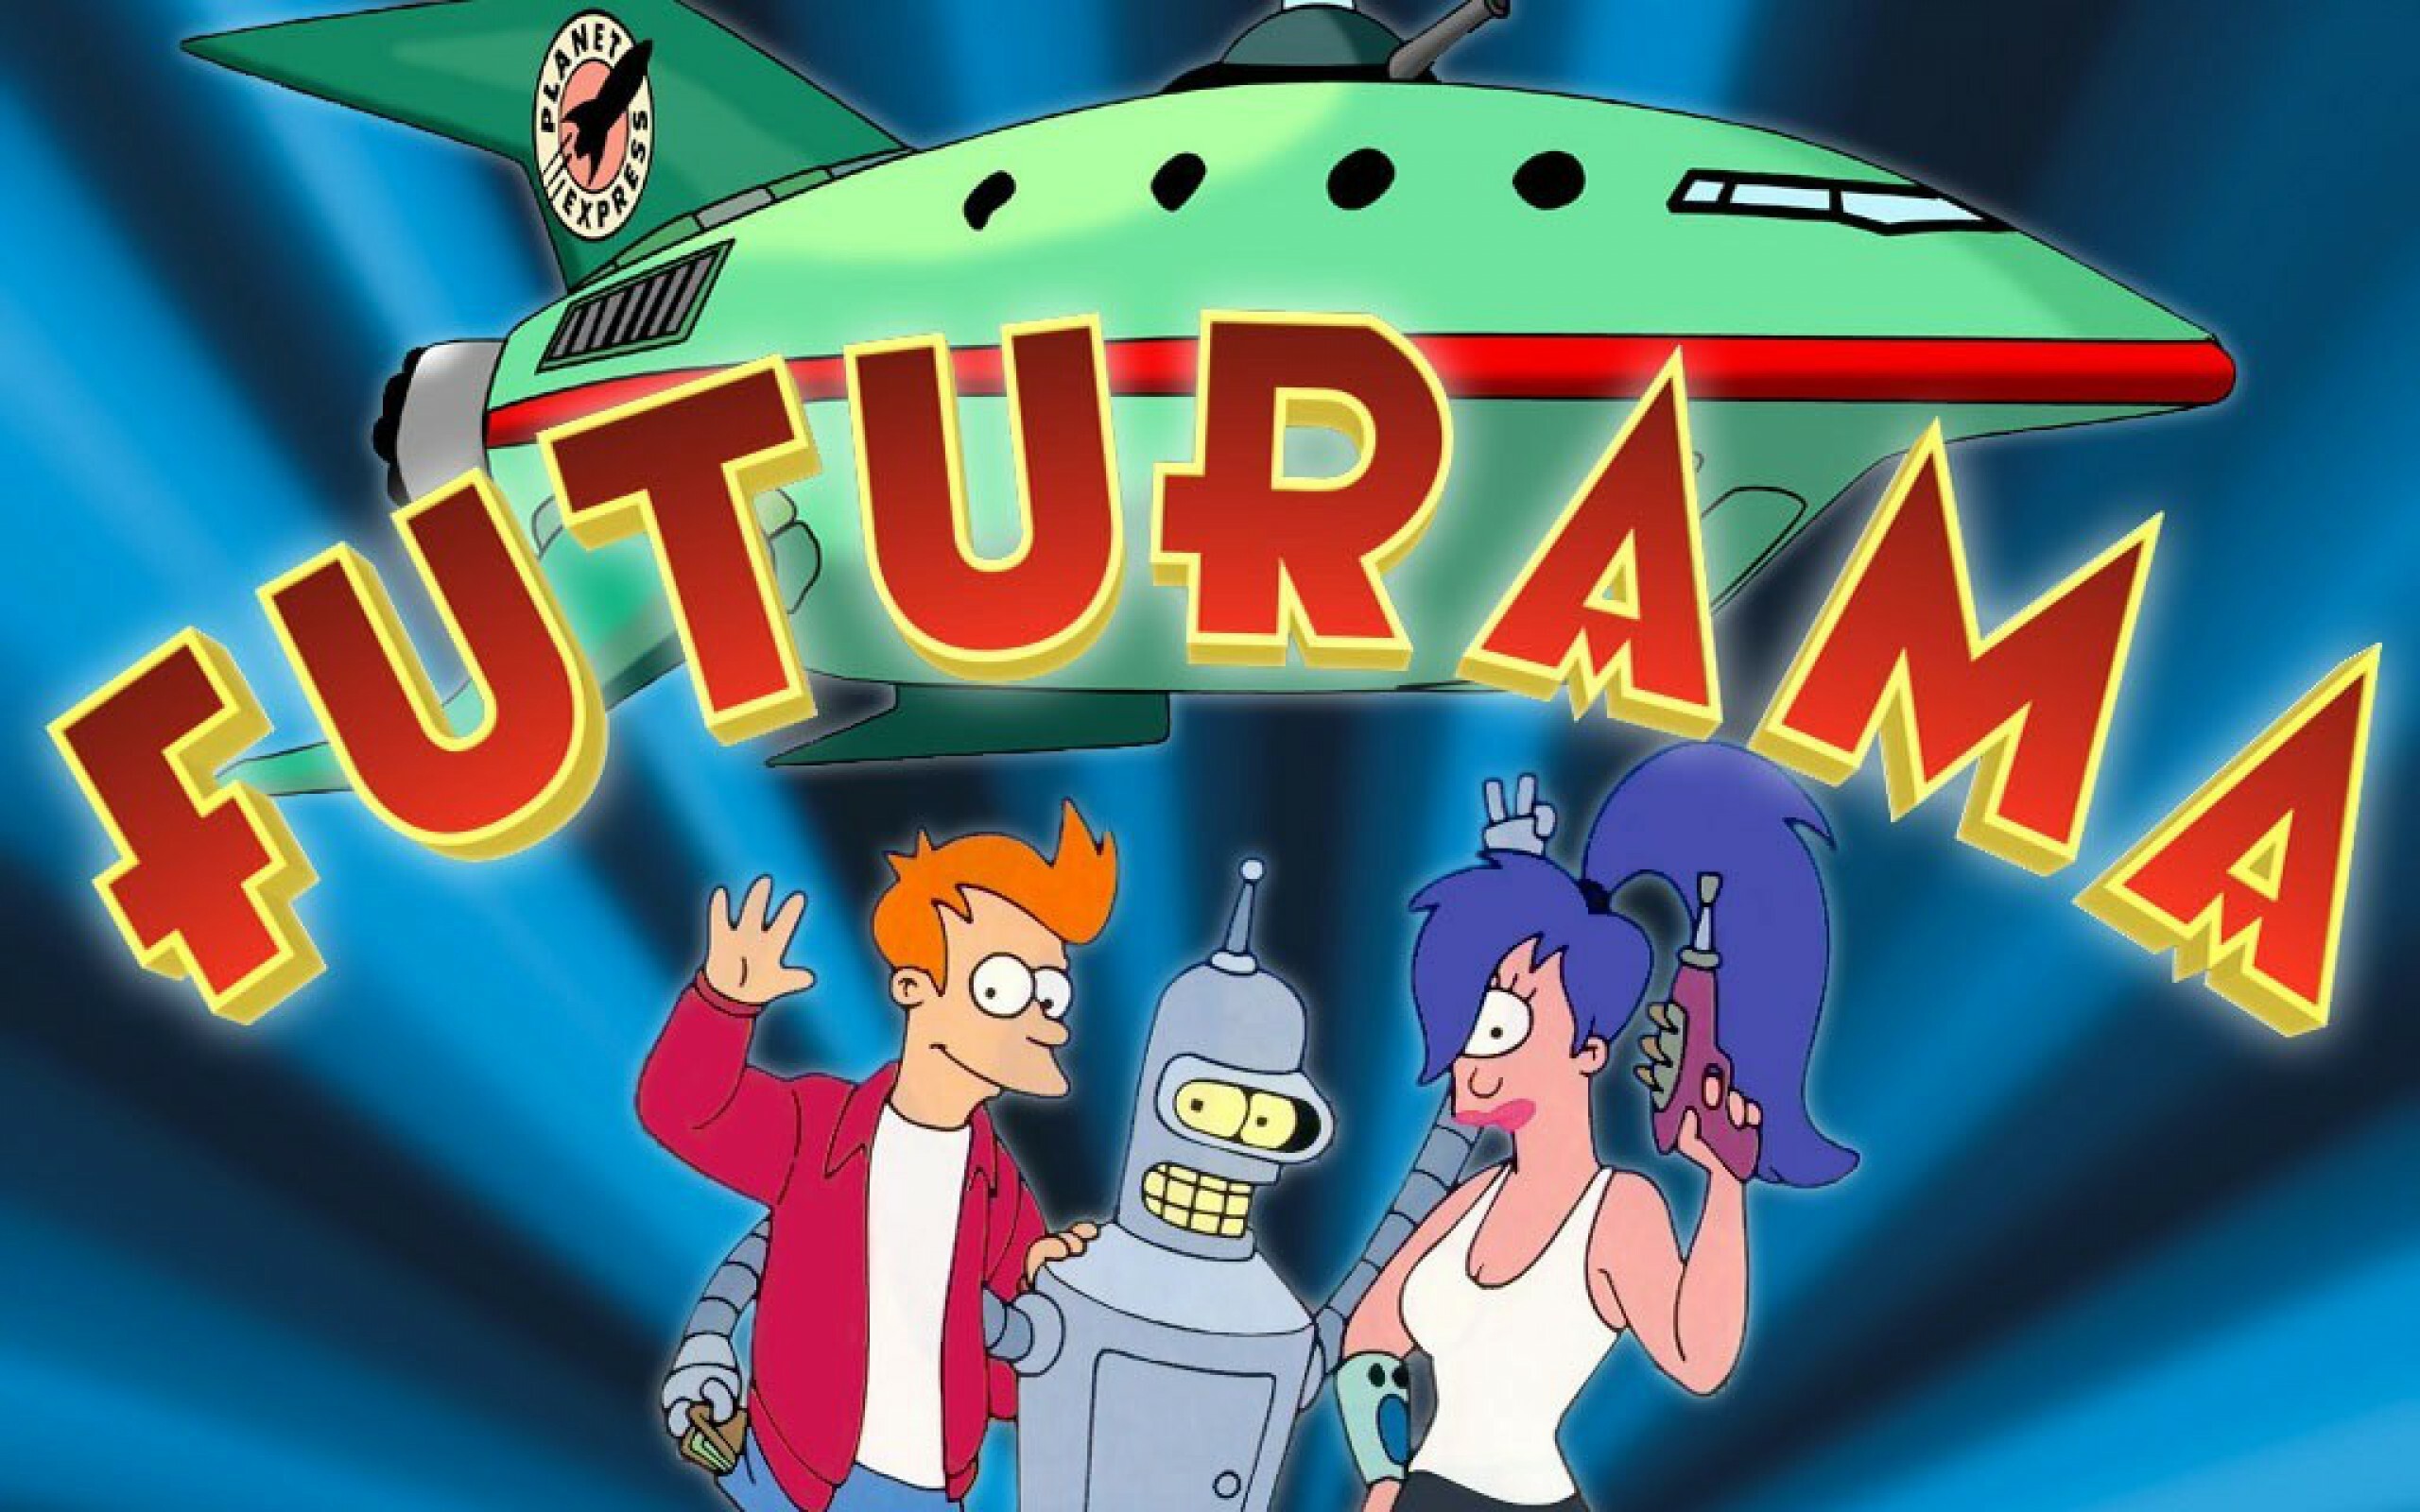 Futurama: Matt Groening's hilarious animated series about a pizza delivery man named Fry. 2560x1600 HD Background.